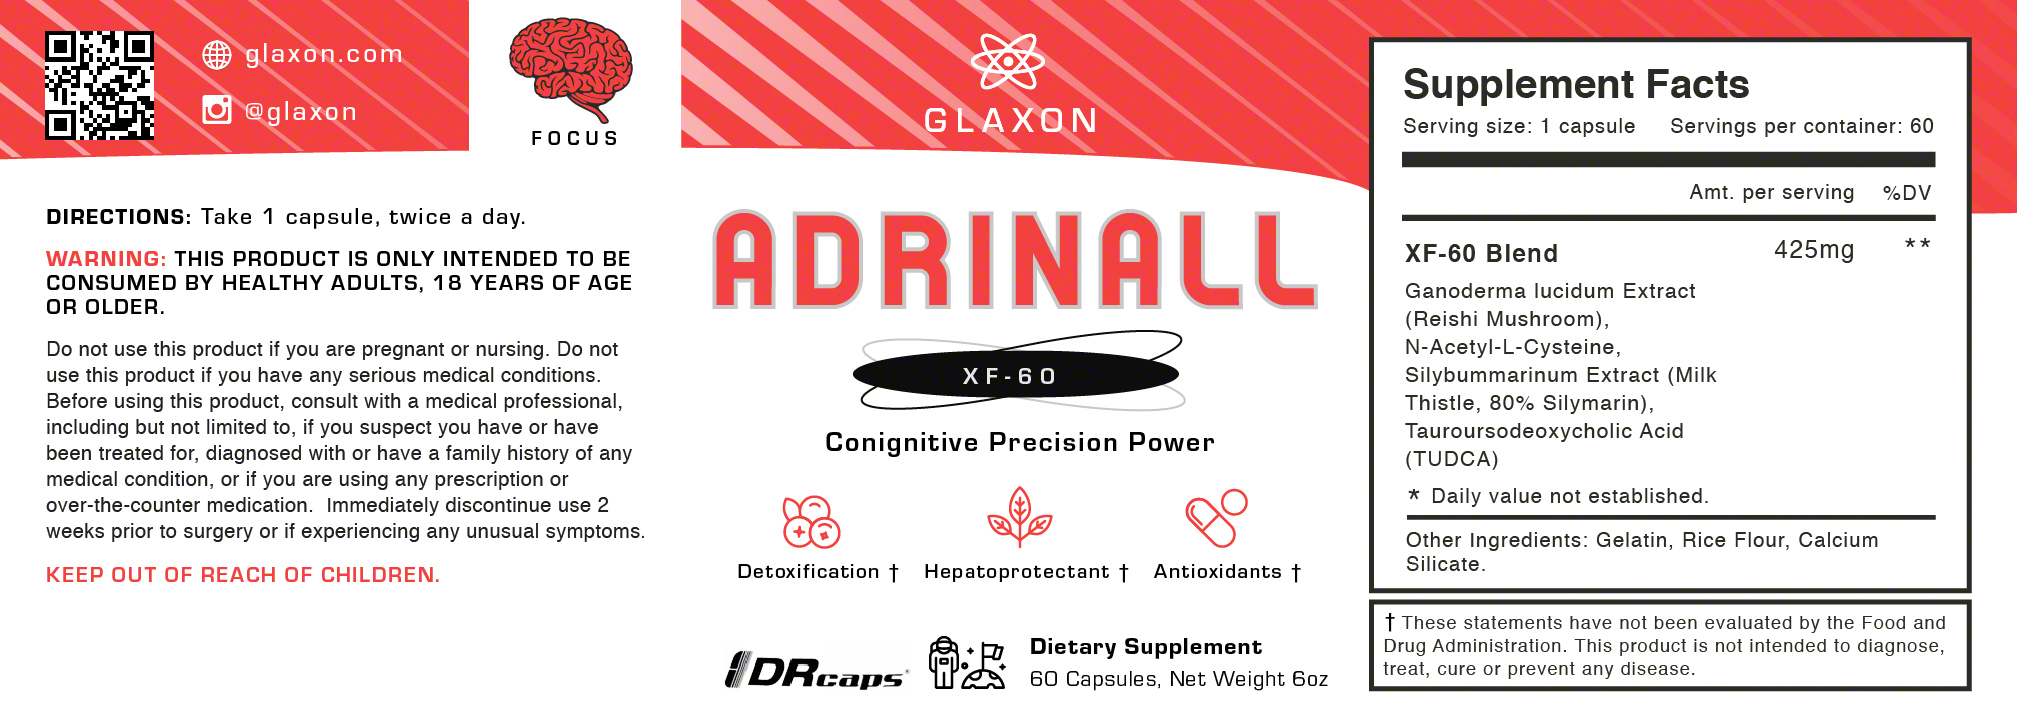 Glaxon Adrinall, supplement facts